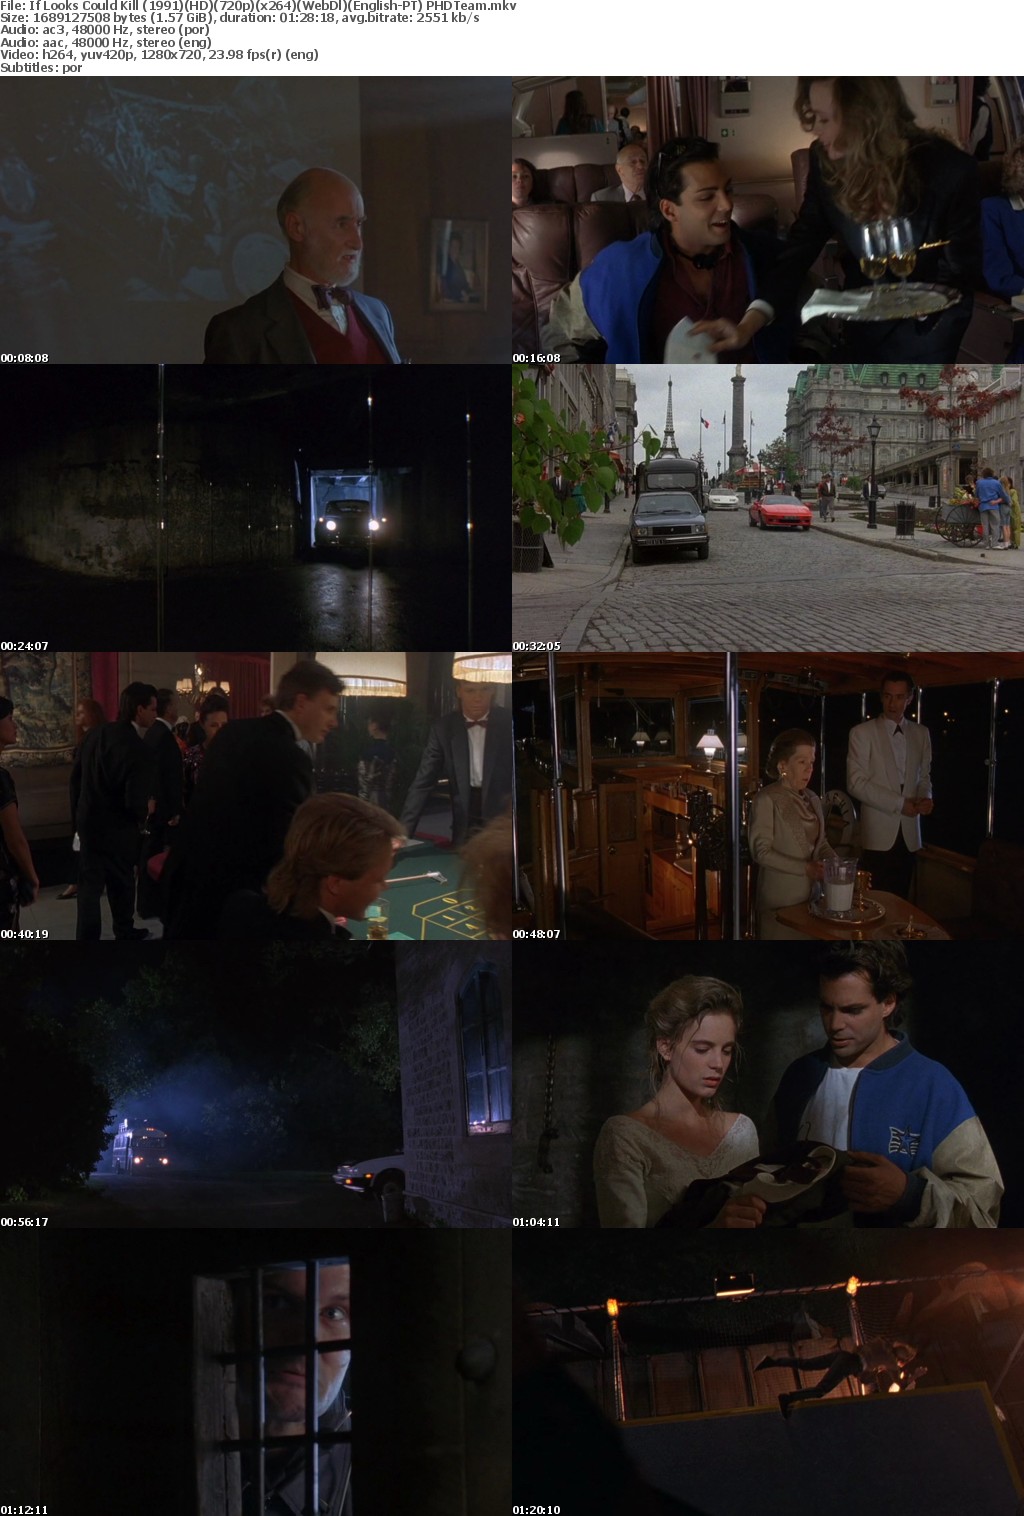 If Looks Could Kill (1991)(HD)(720p)(x264)(WebDl)(English-PT) PHDTeam